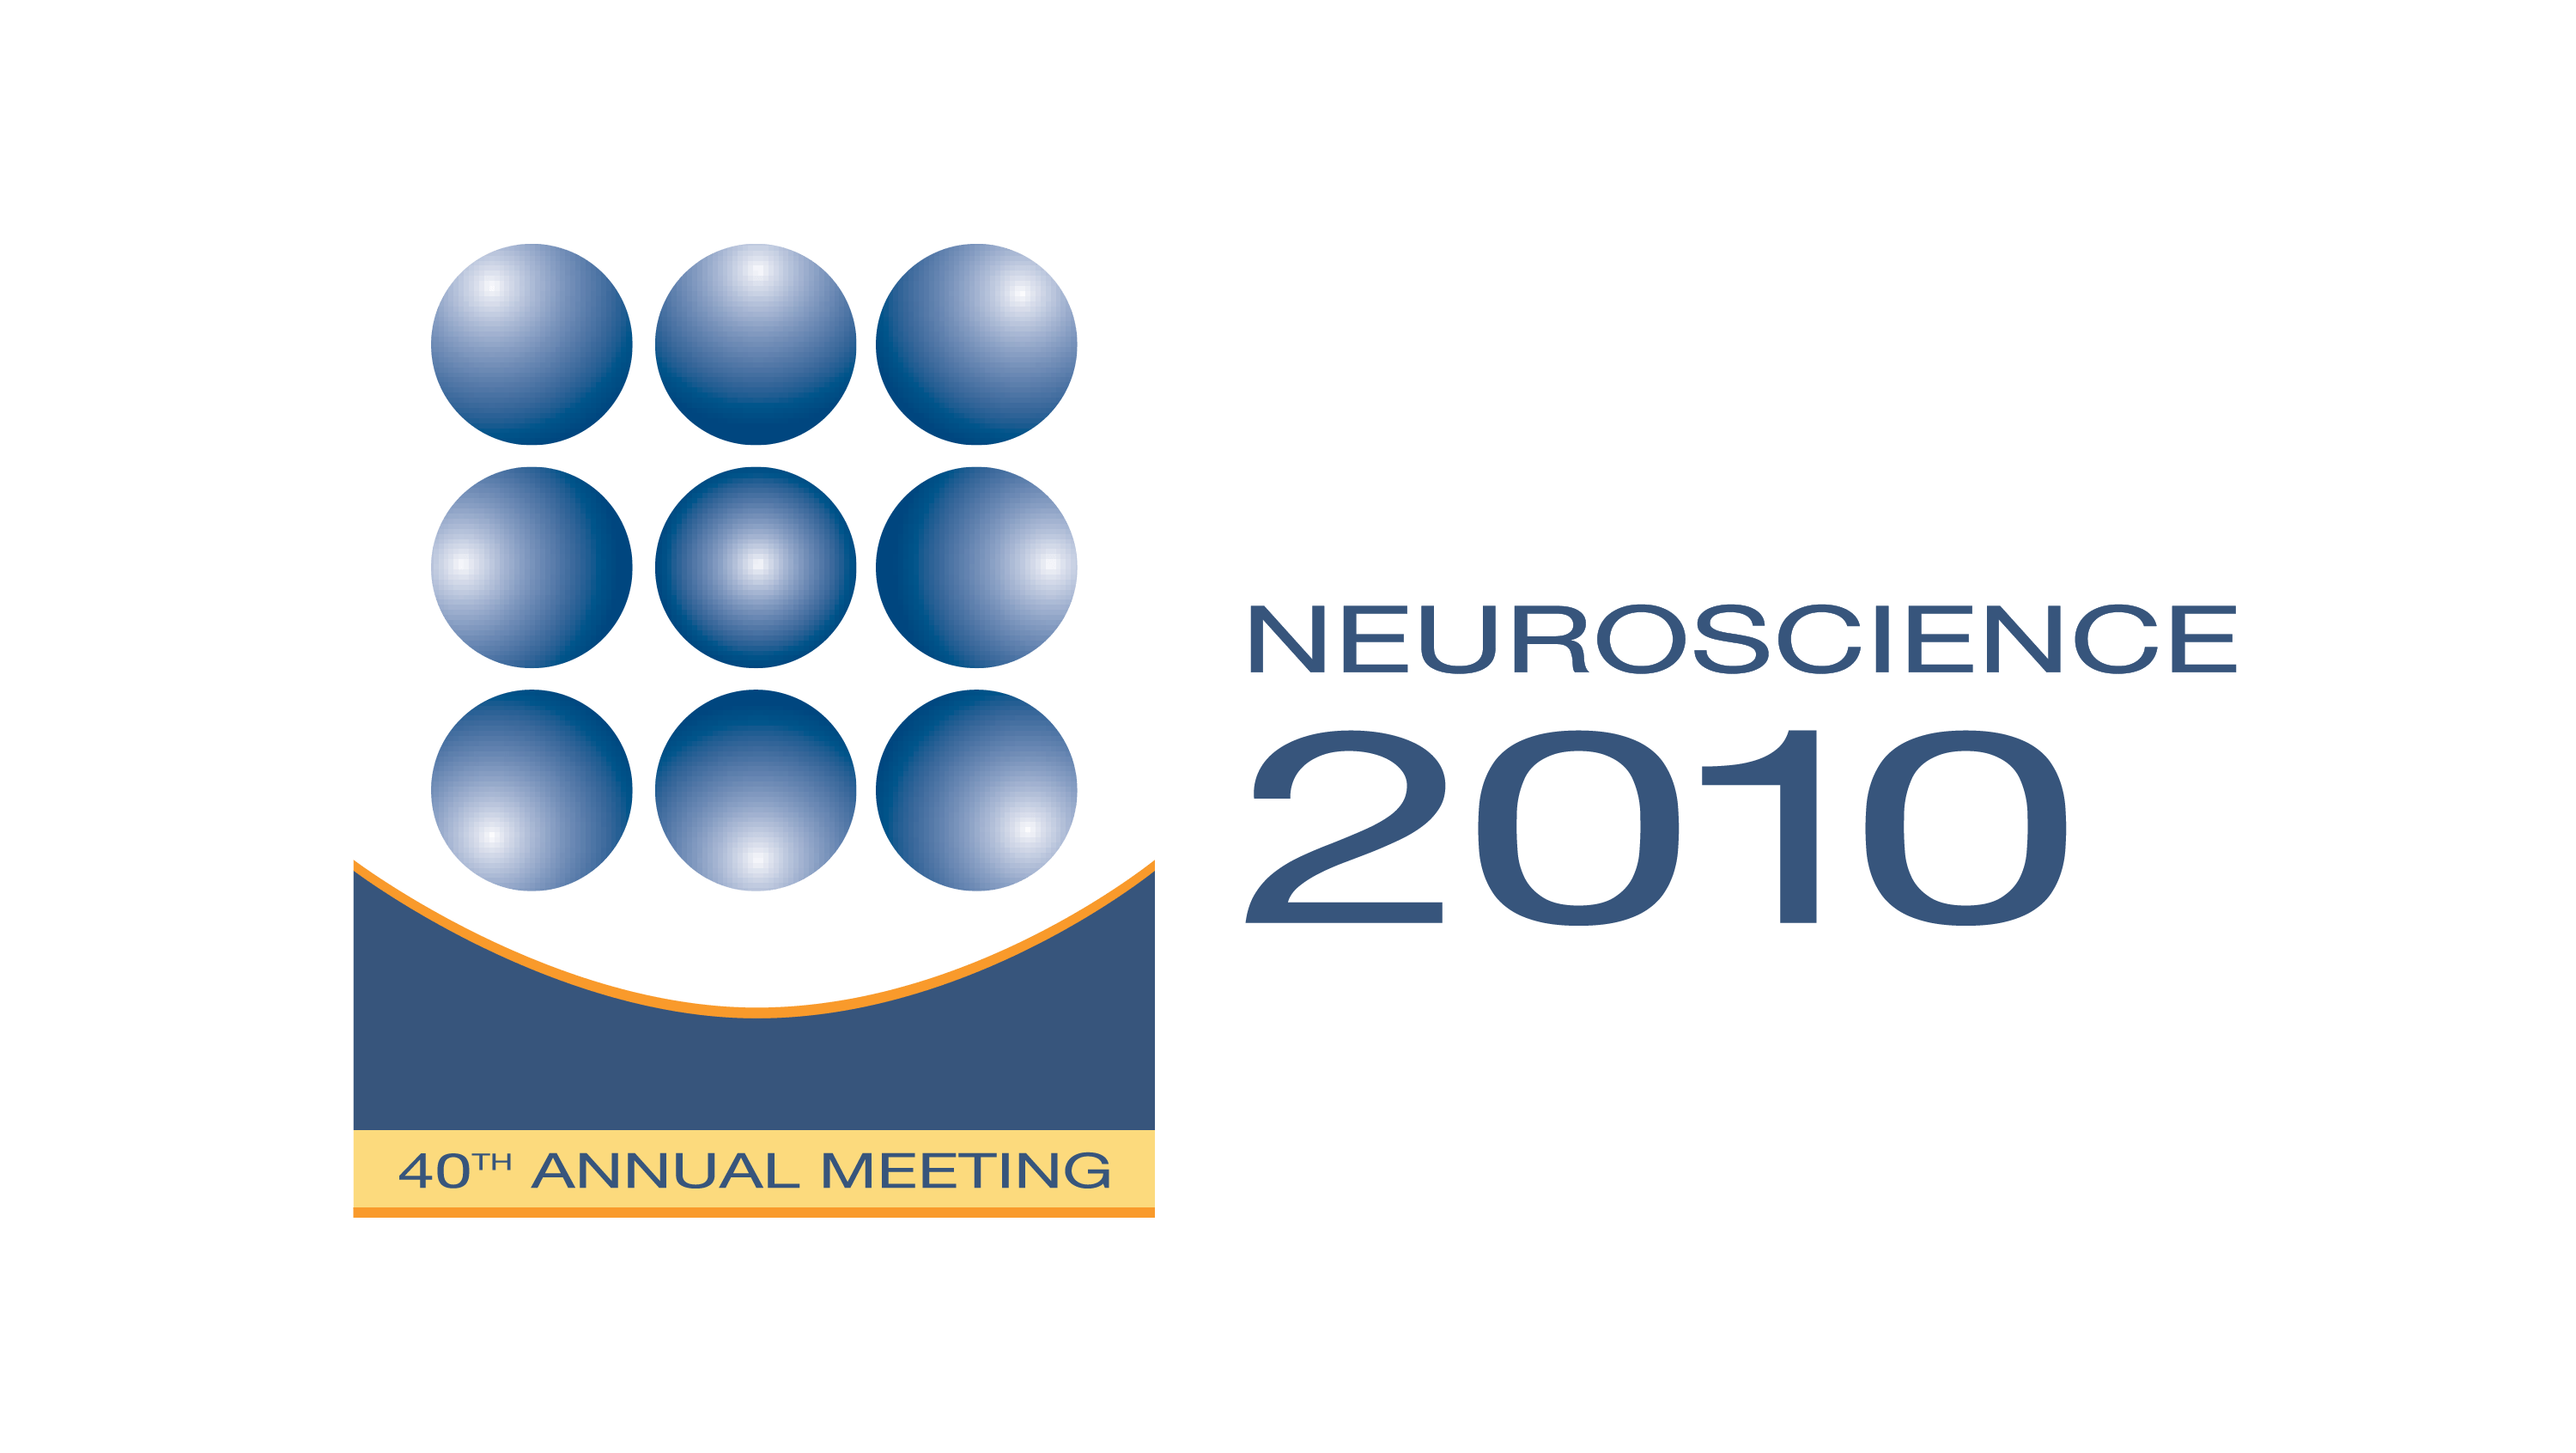 Society for Neuroscience - Past and Future Annual Meetings